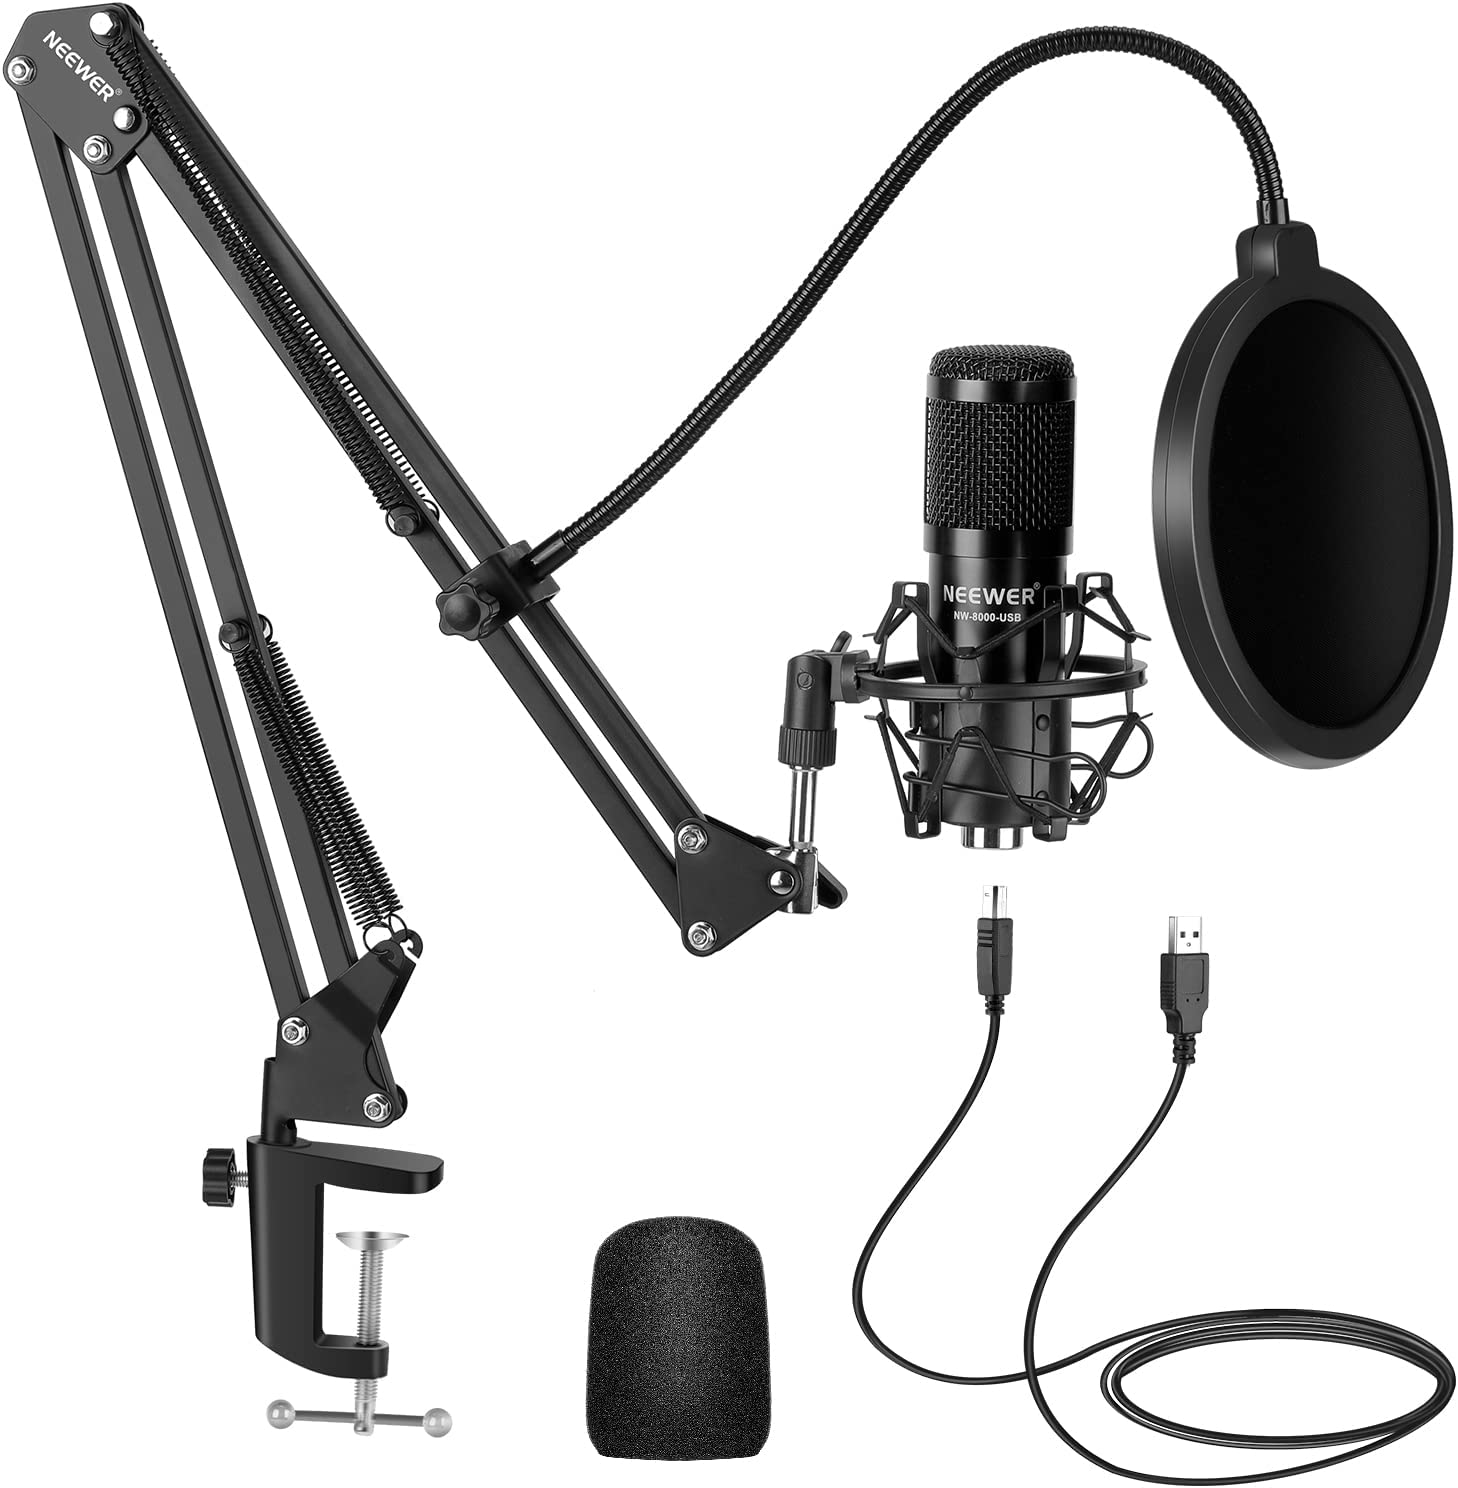 Neewer Condenser USB  Microphone Kit w/ Shock Mount & Pop Filter (NW-8000-USB, Black) $14.40 + Free Shipping